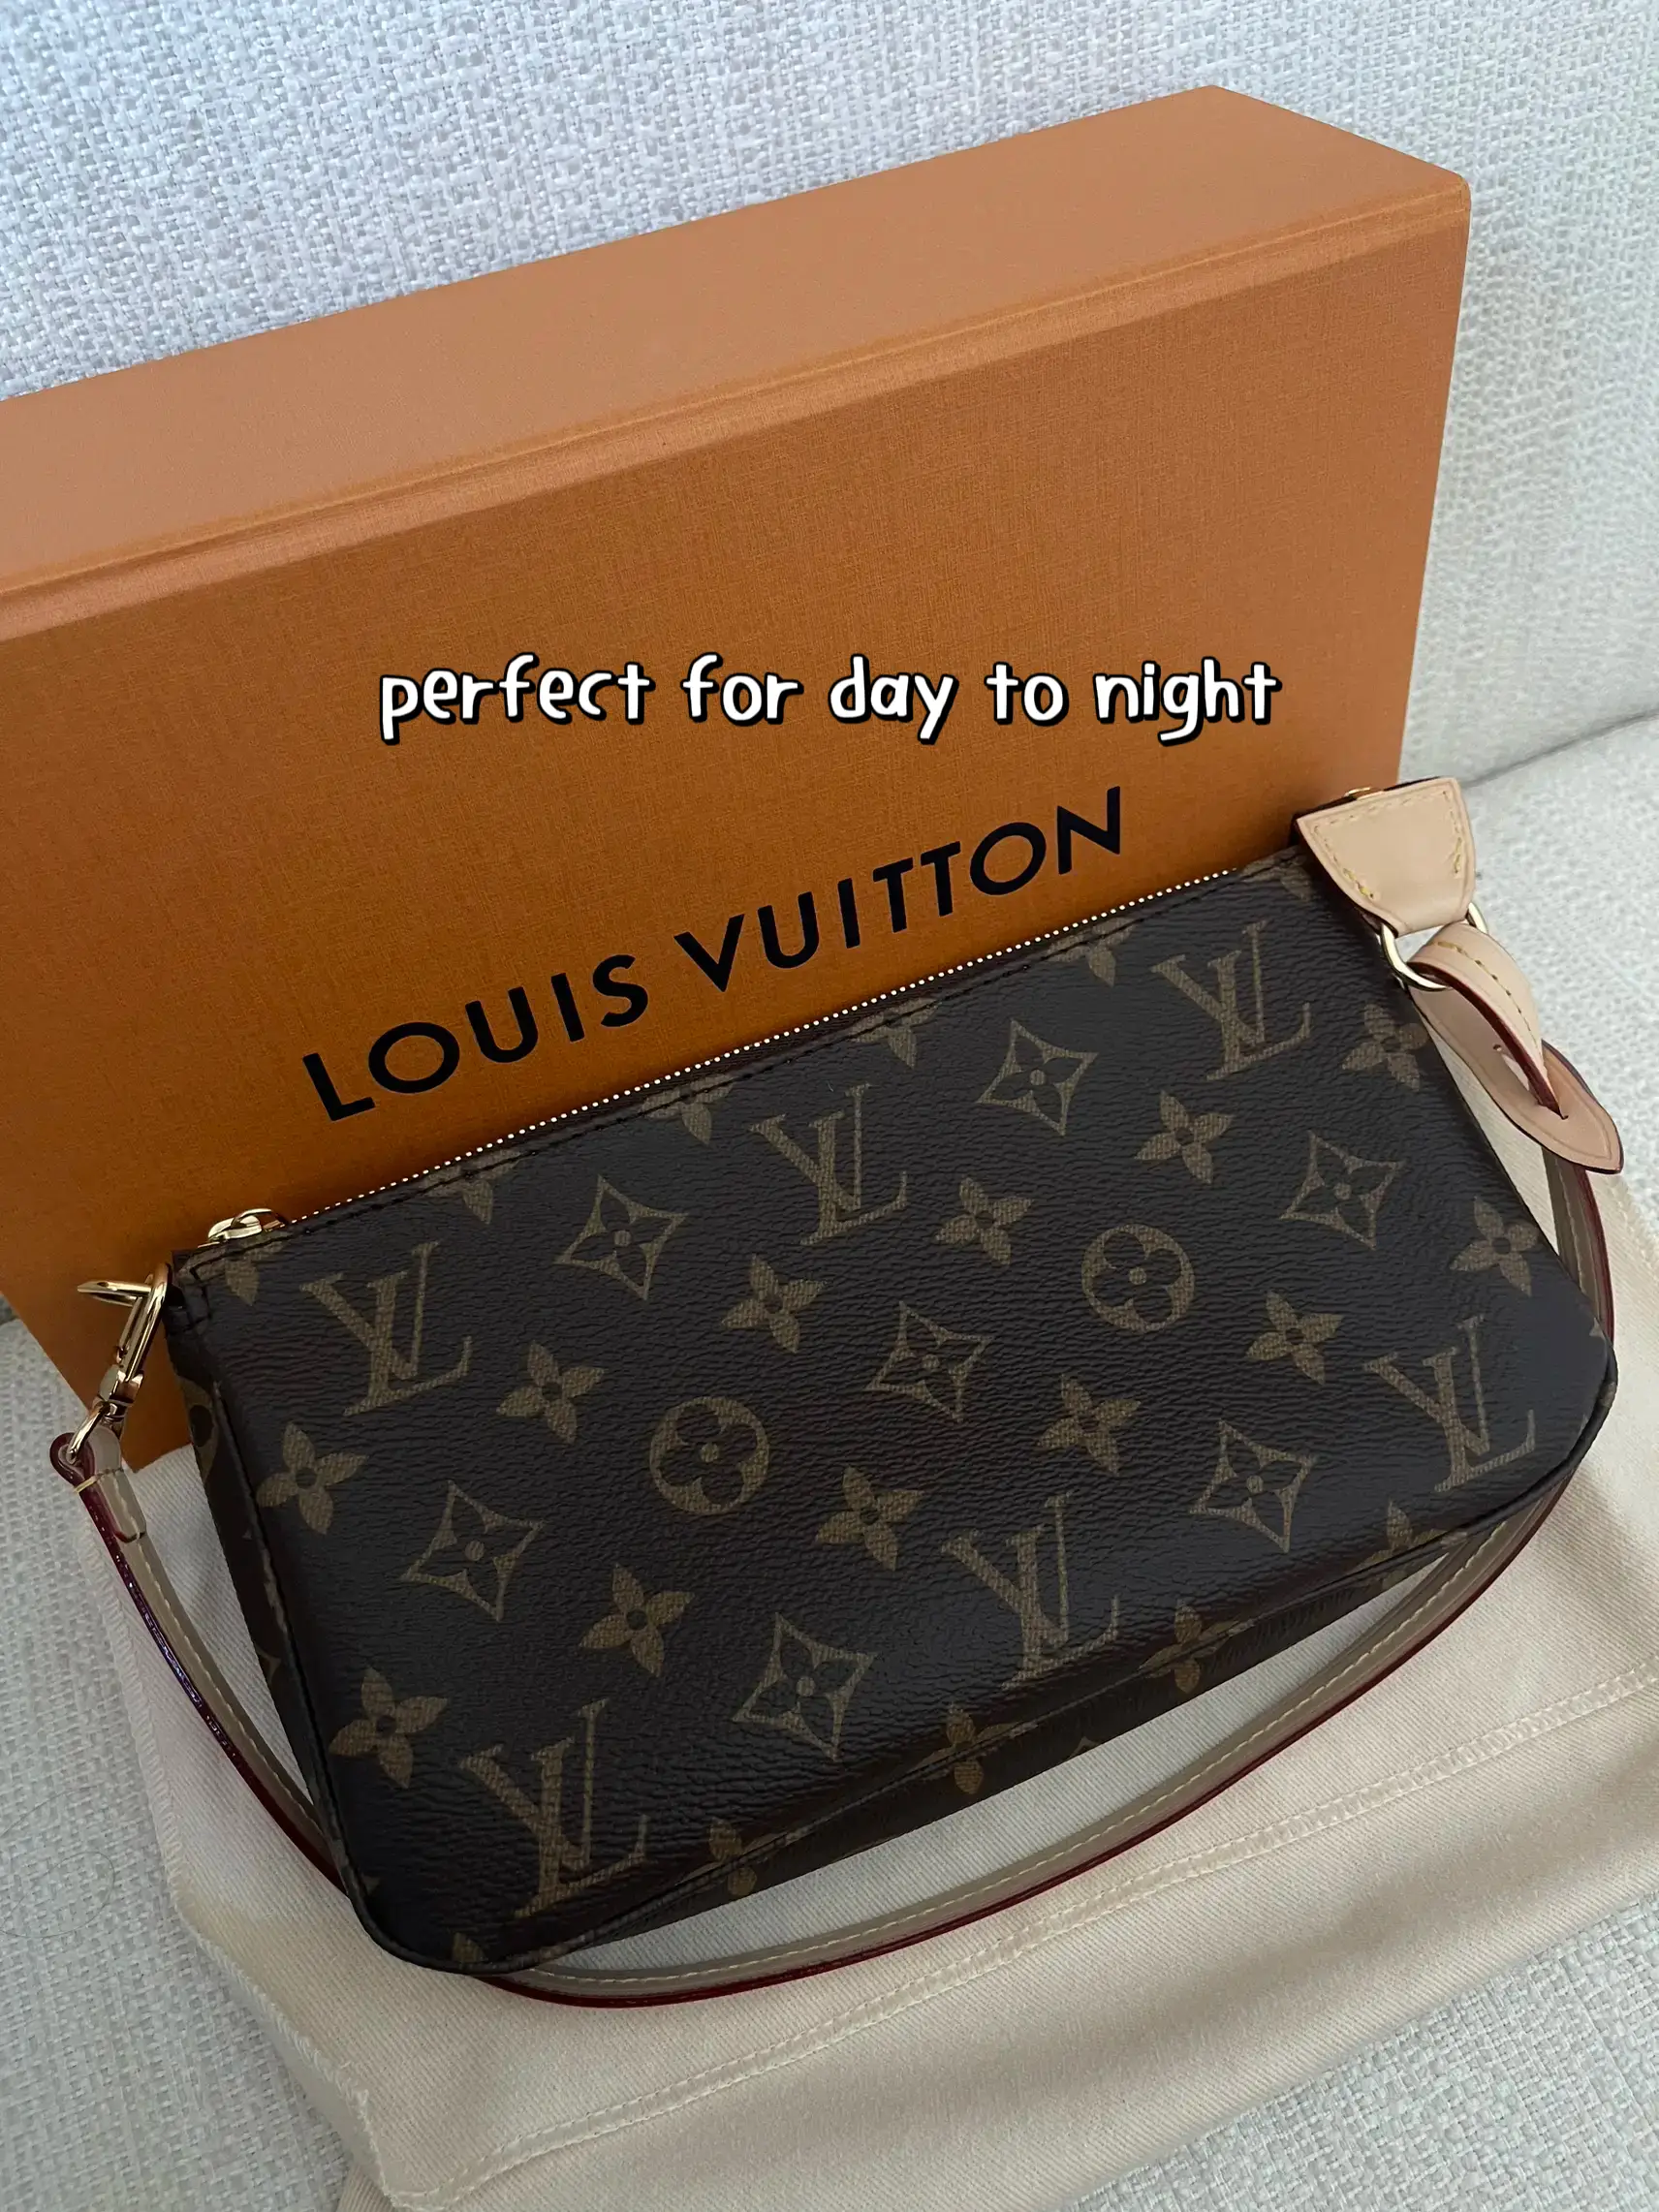 Who makes the best LV bags? : r/RepladiesDesigner